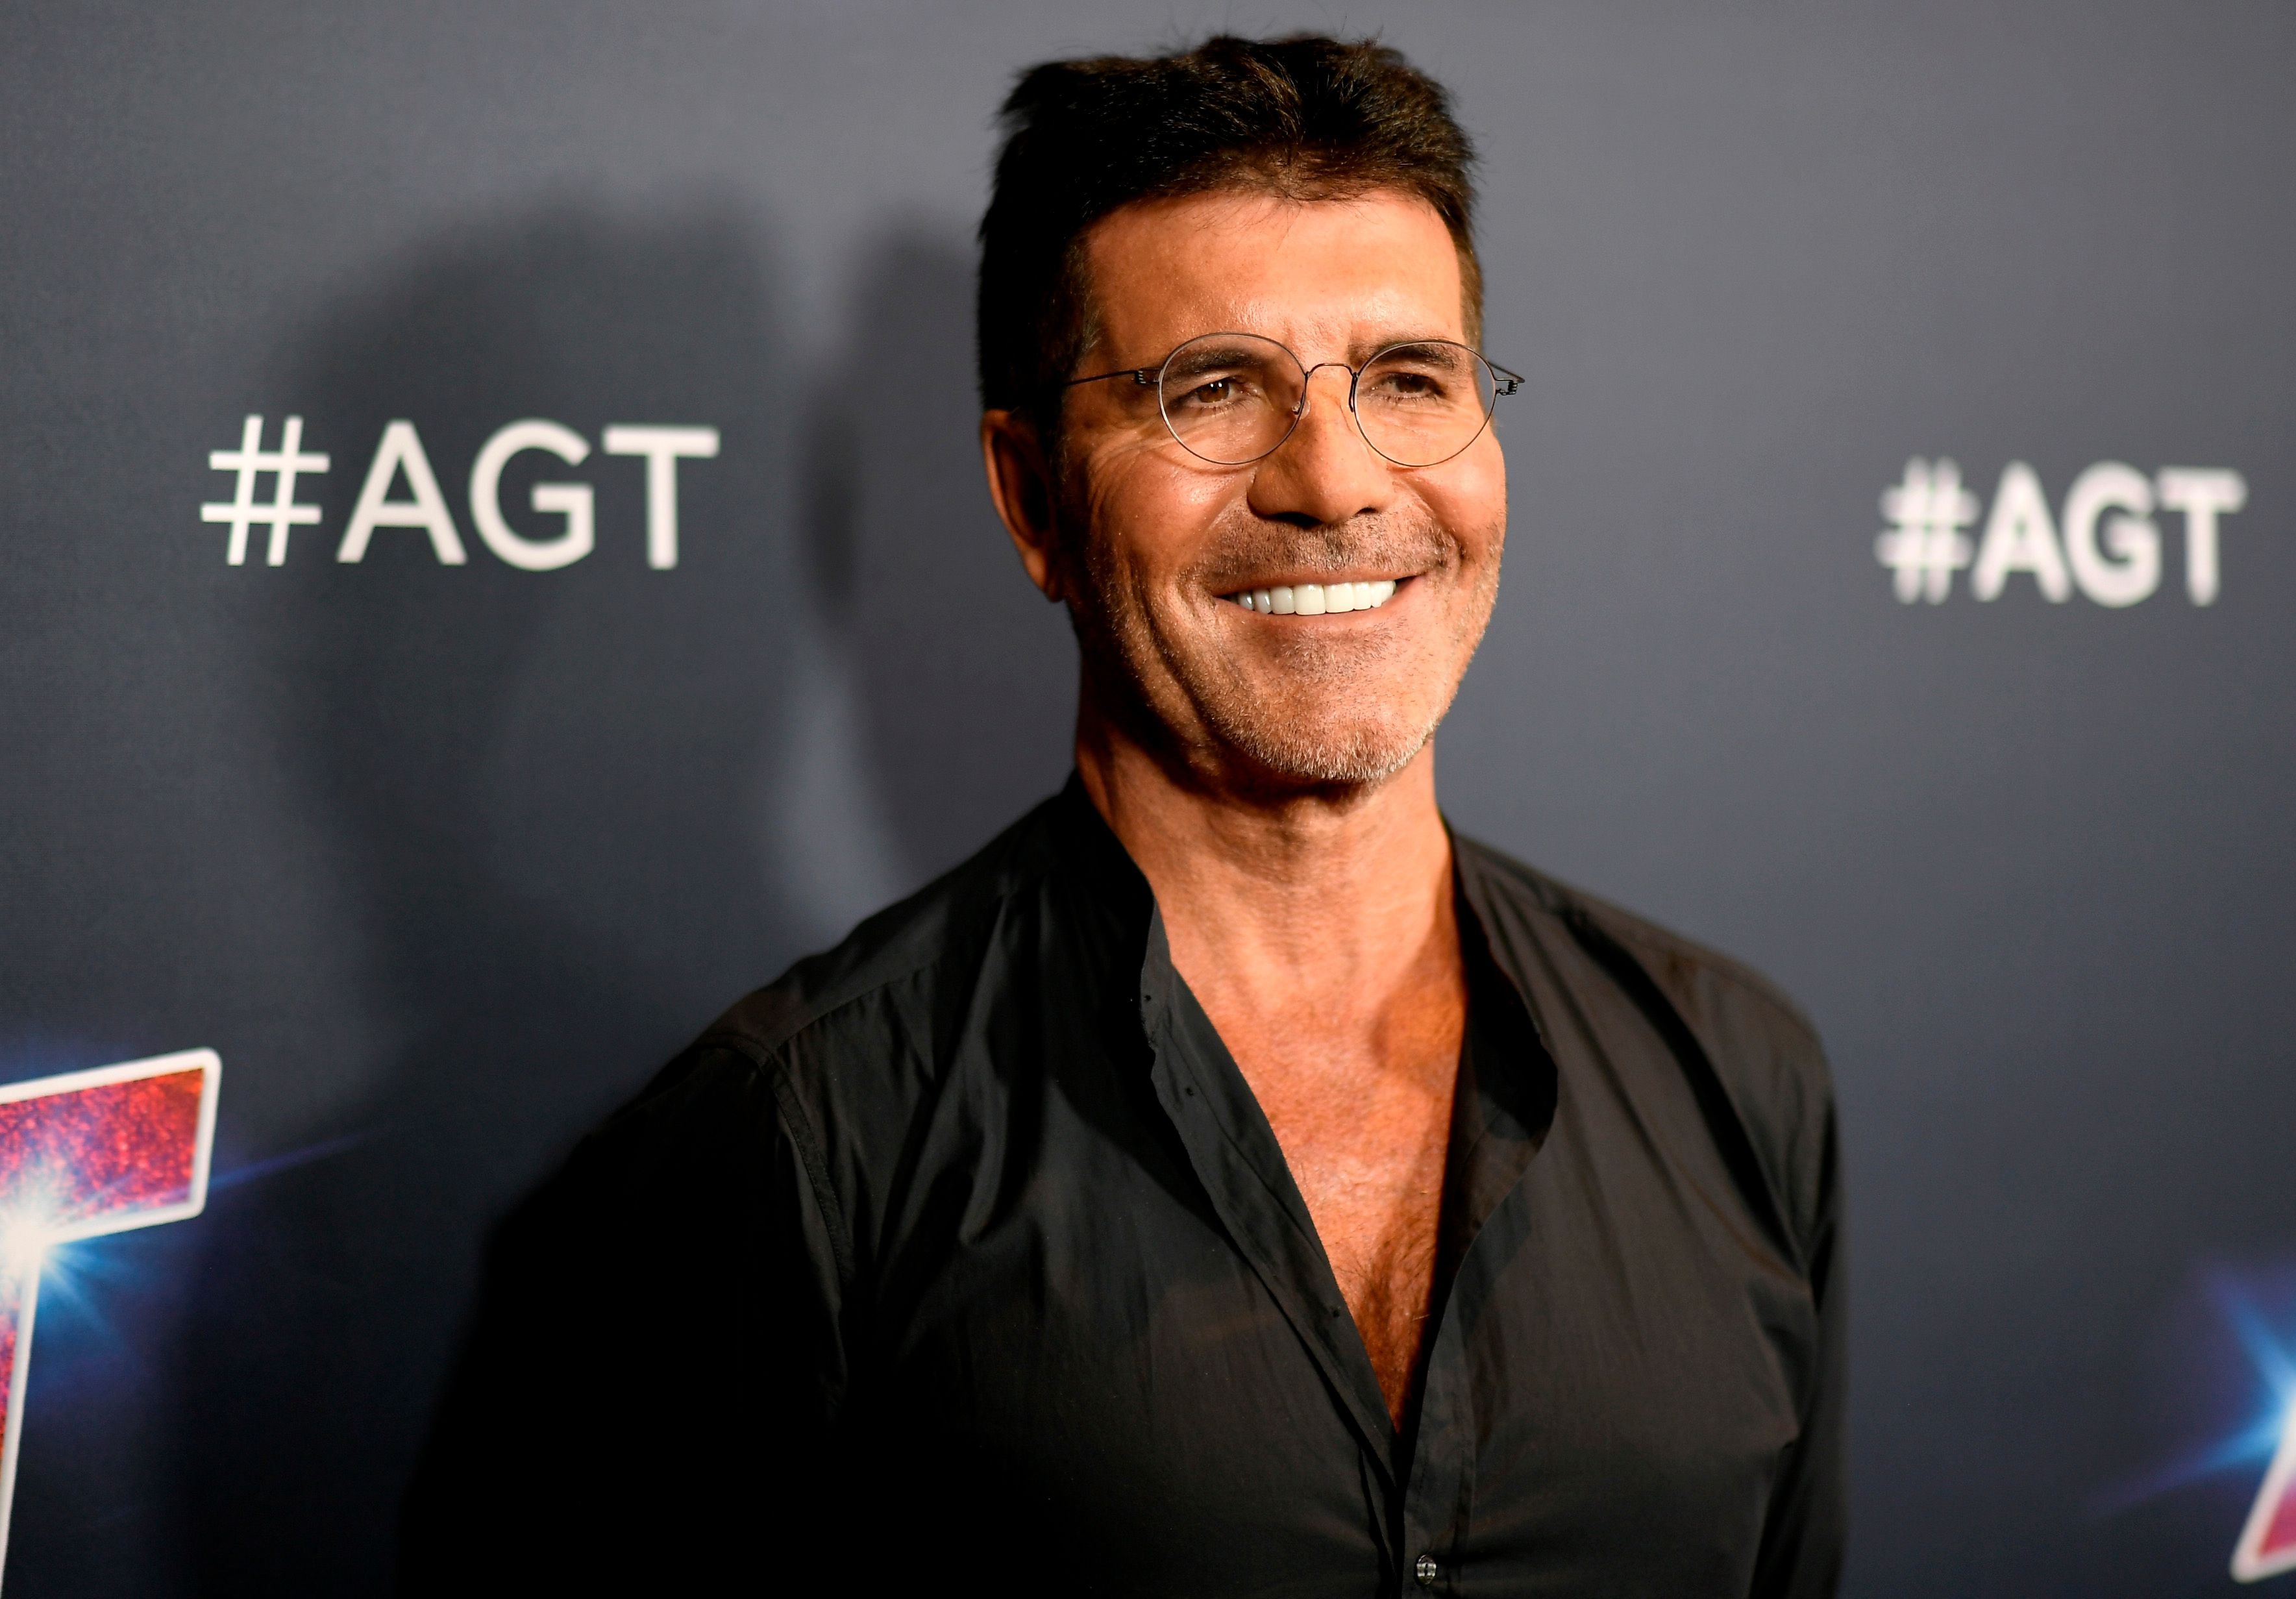 Simon Cowell at "America's Got Talent" season 14 live show red carpet on September 17, 2019, in Hollywood, California | Photo: Frazer Harrison/Getty Images